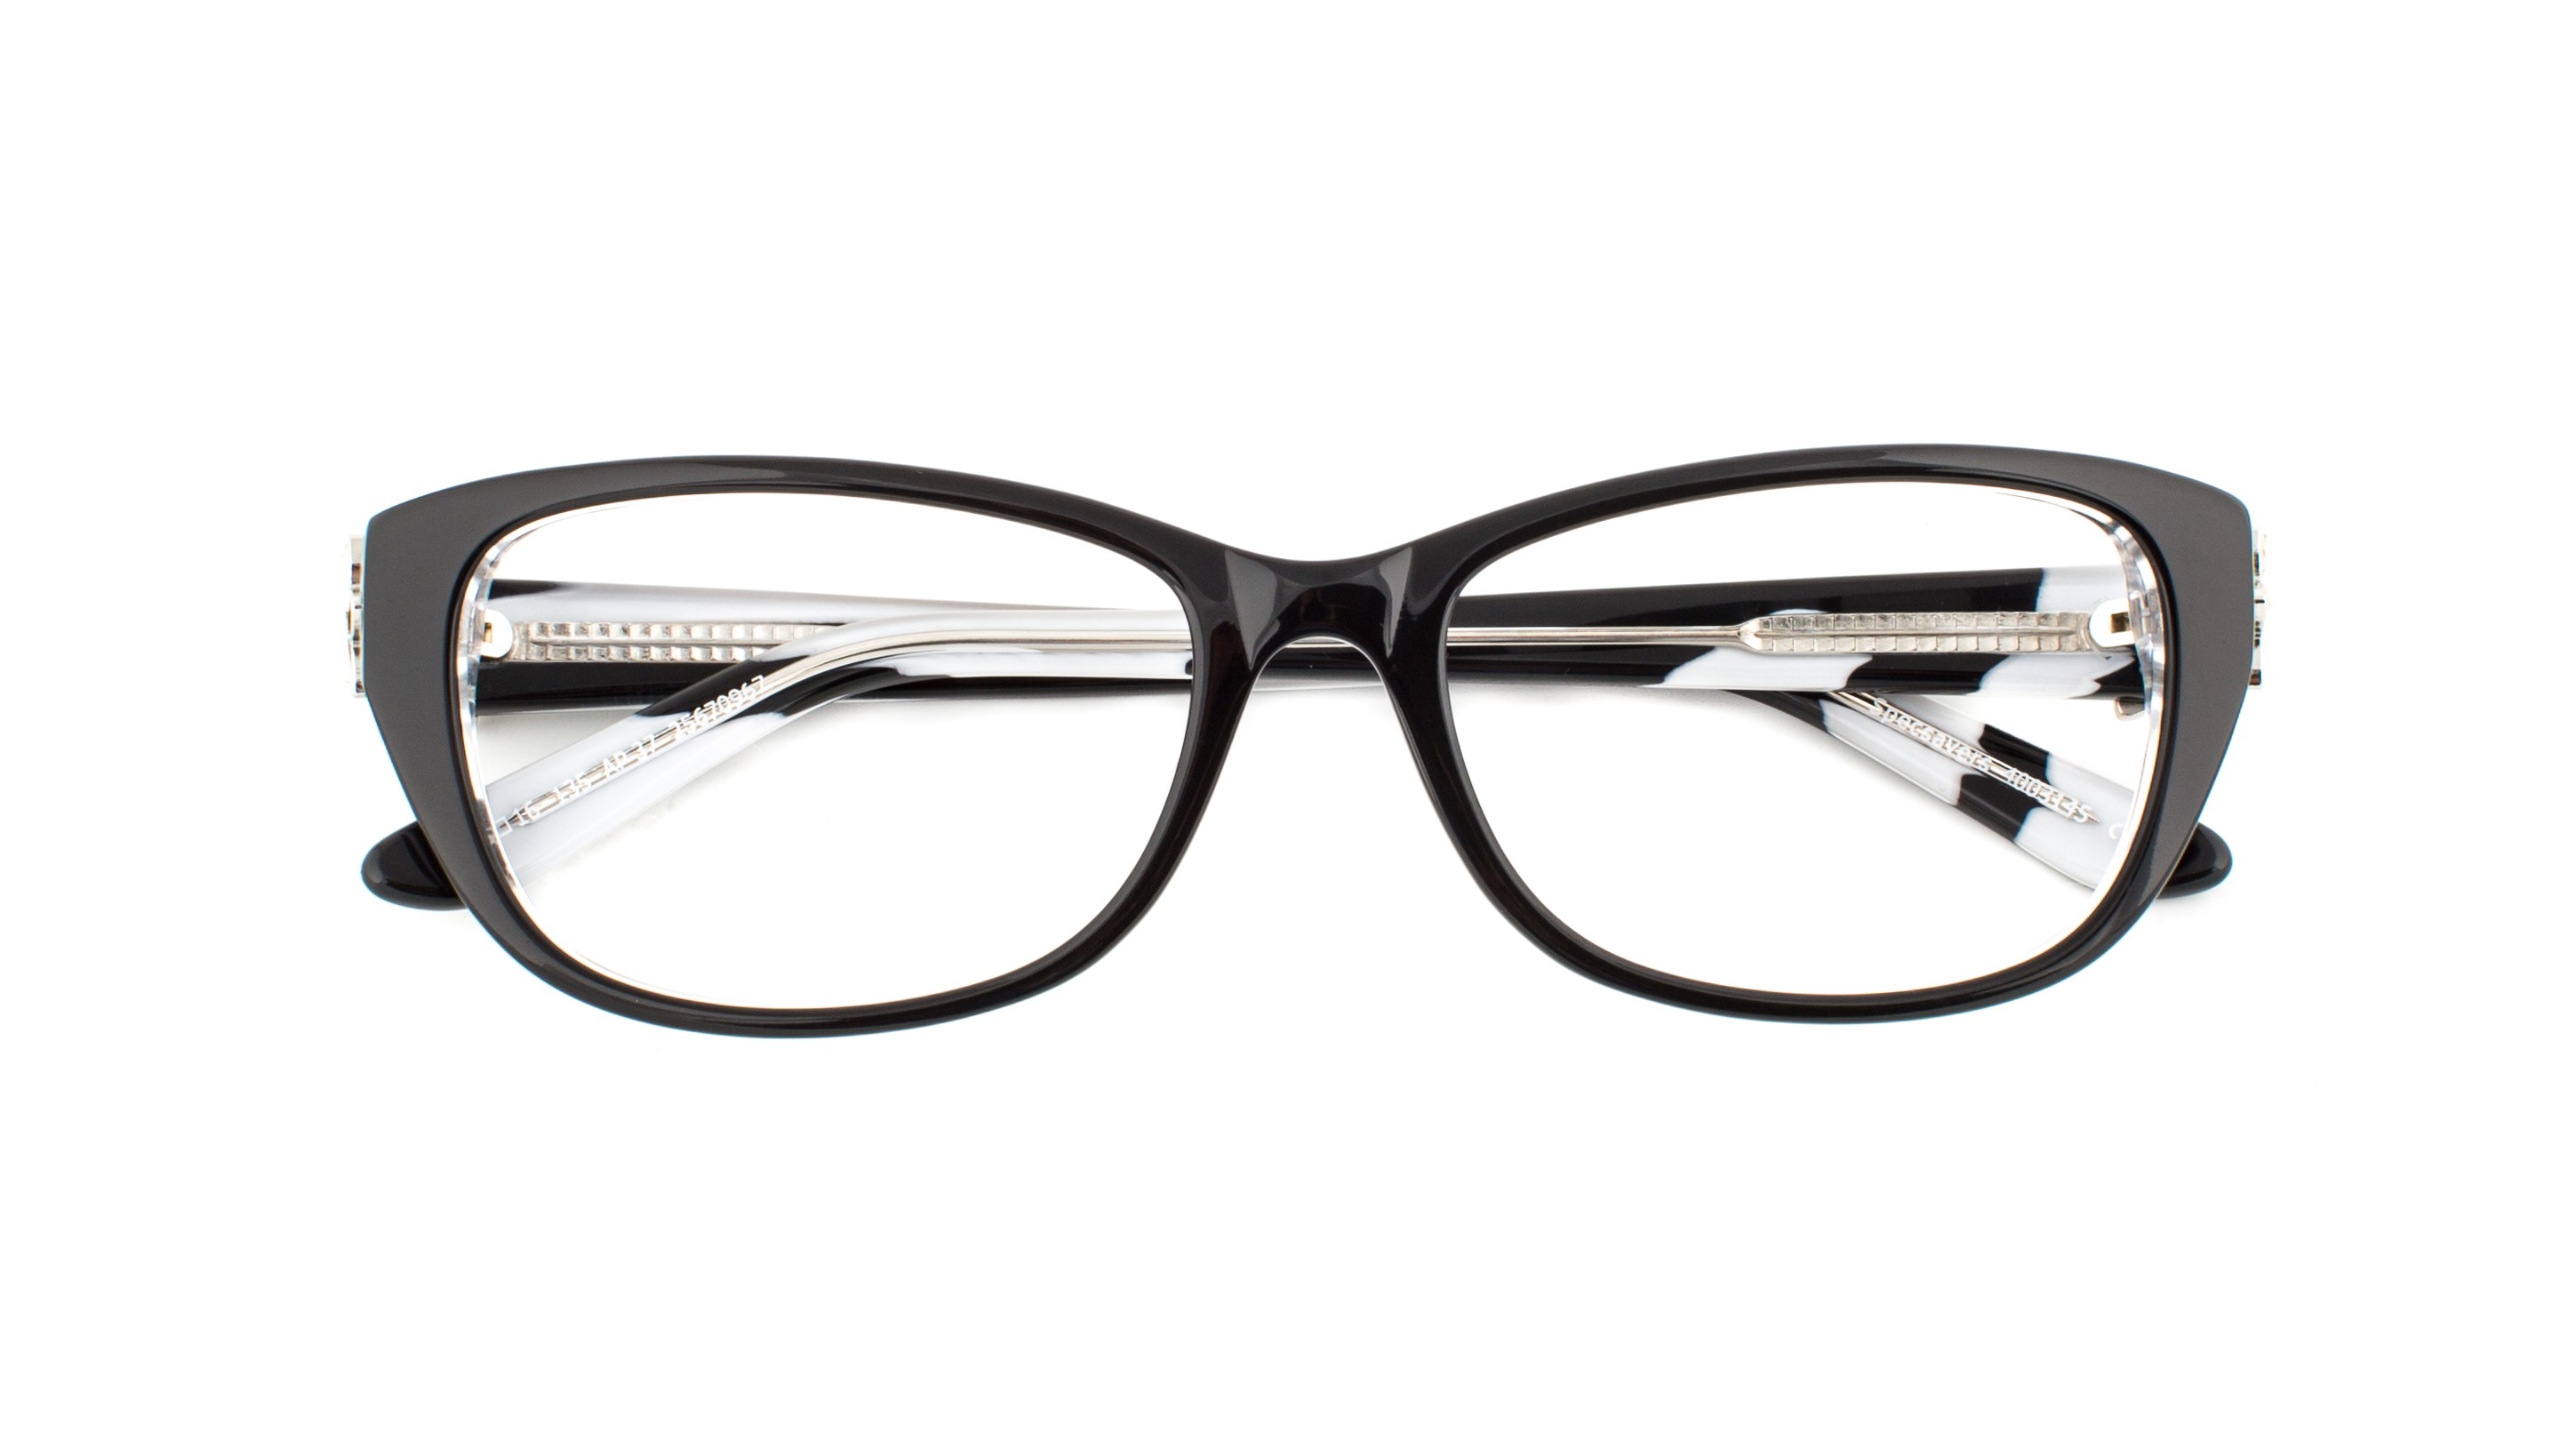 Frame Of Mind - The Specsaver Eyewear Trends of 2015 